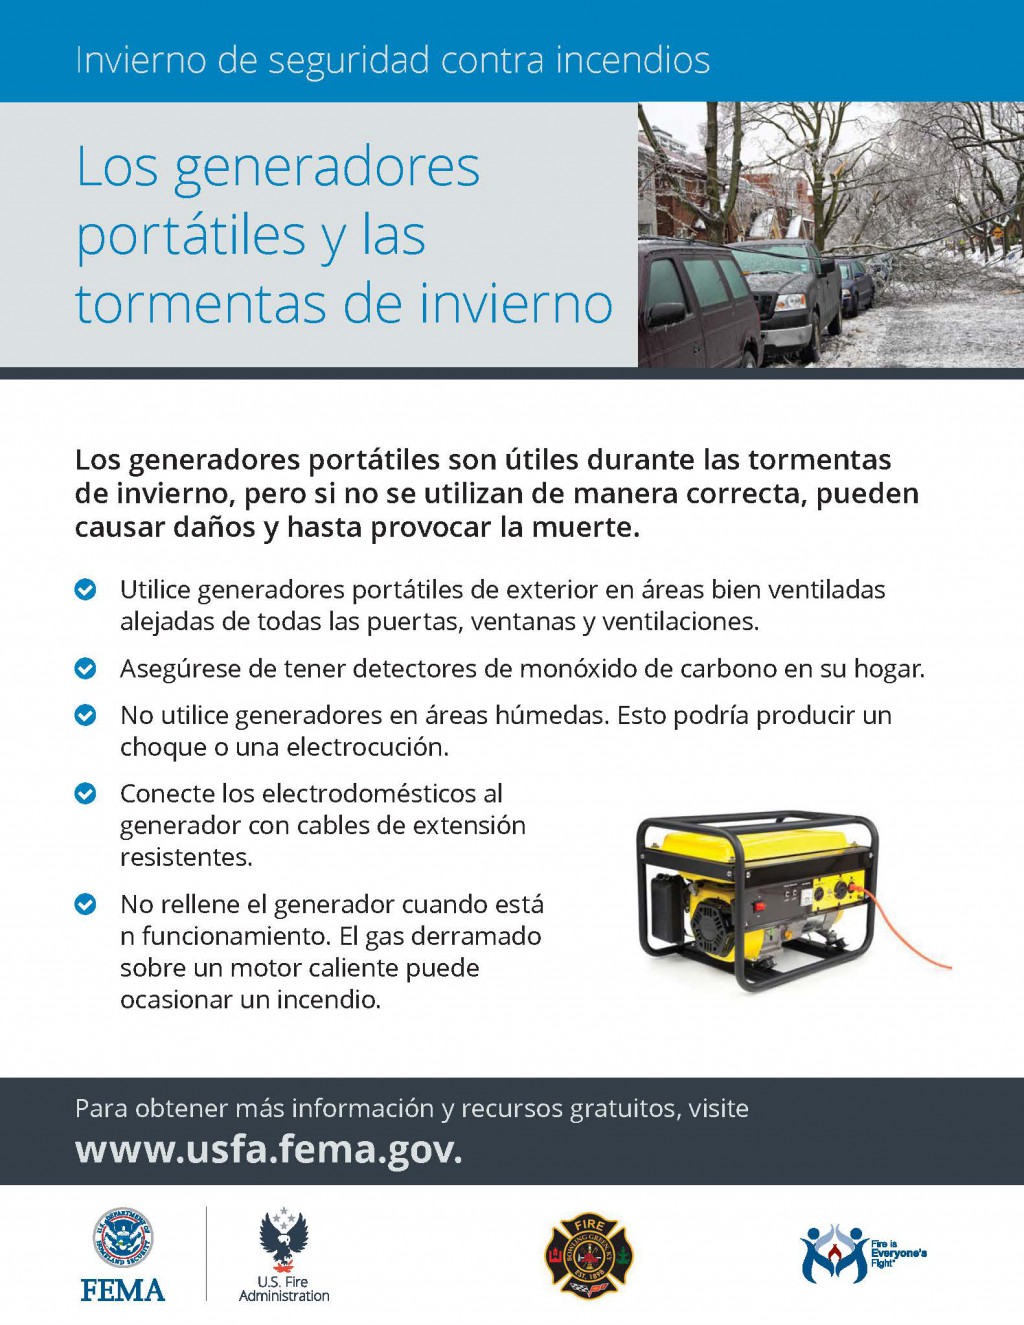 Portable Generators and Winter Storms Spanish